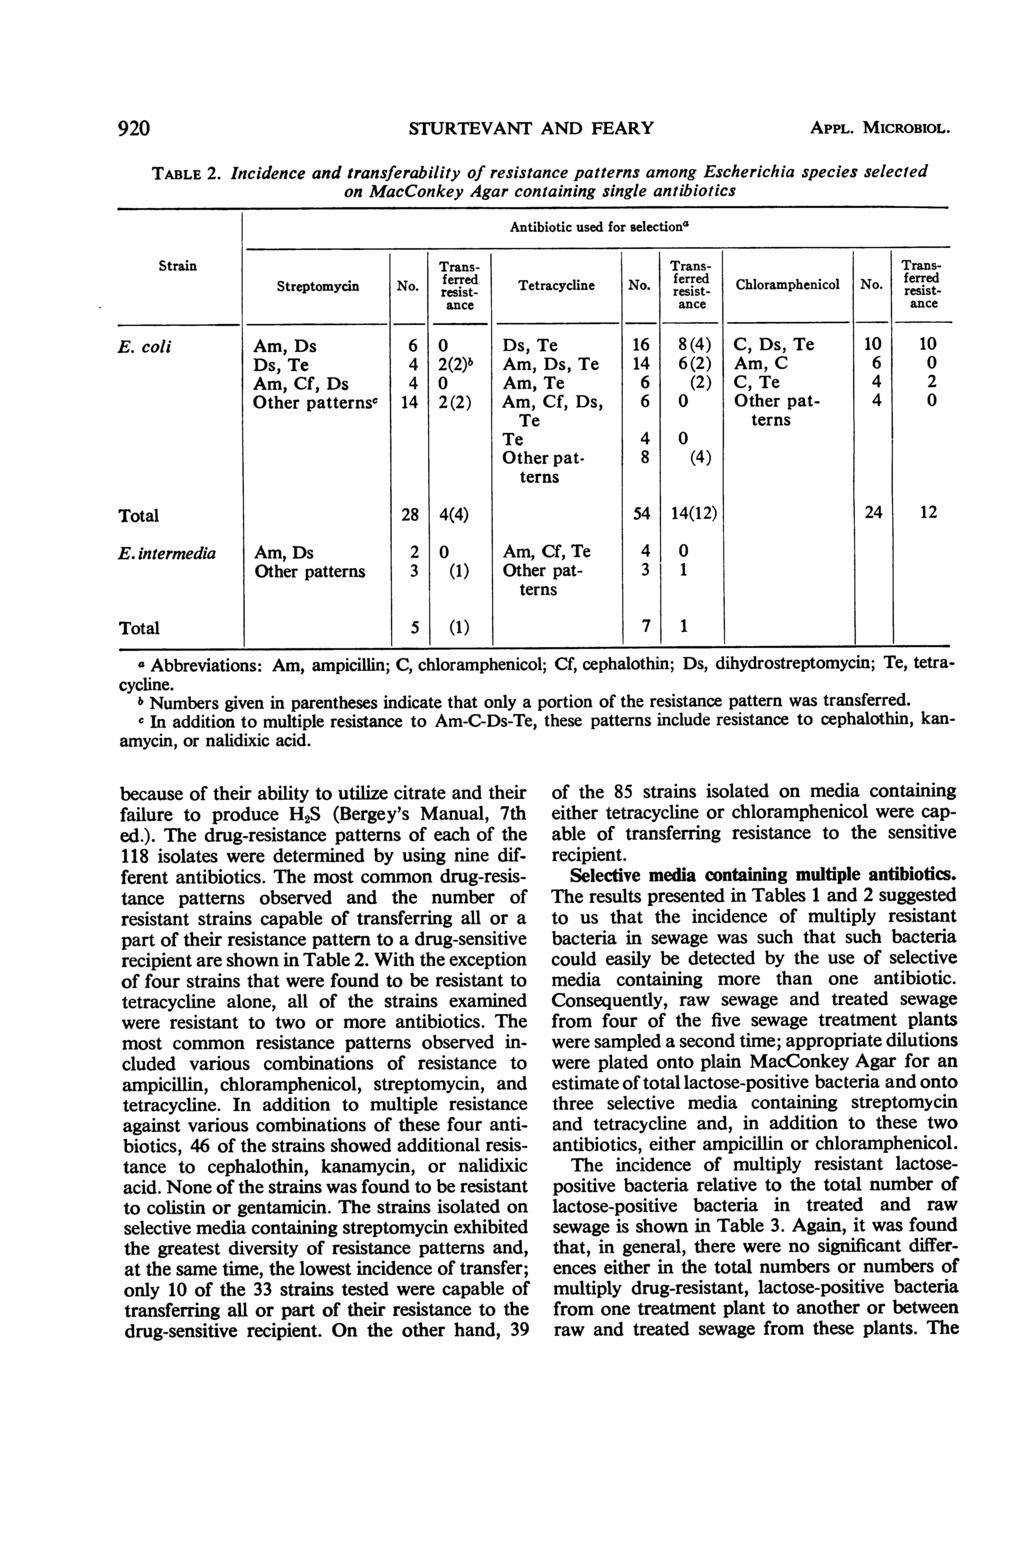 90 STURTEVANT AND FEARY APPL. MICROBIOL. TABLE.